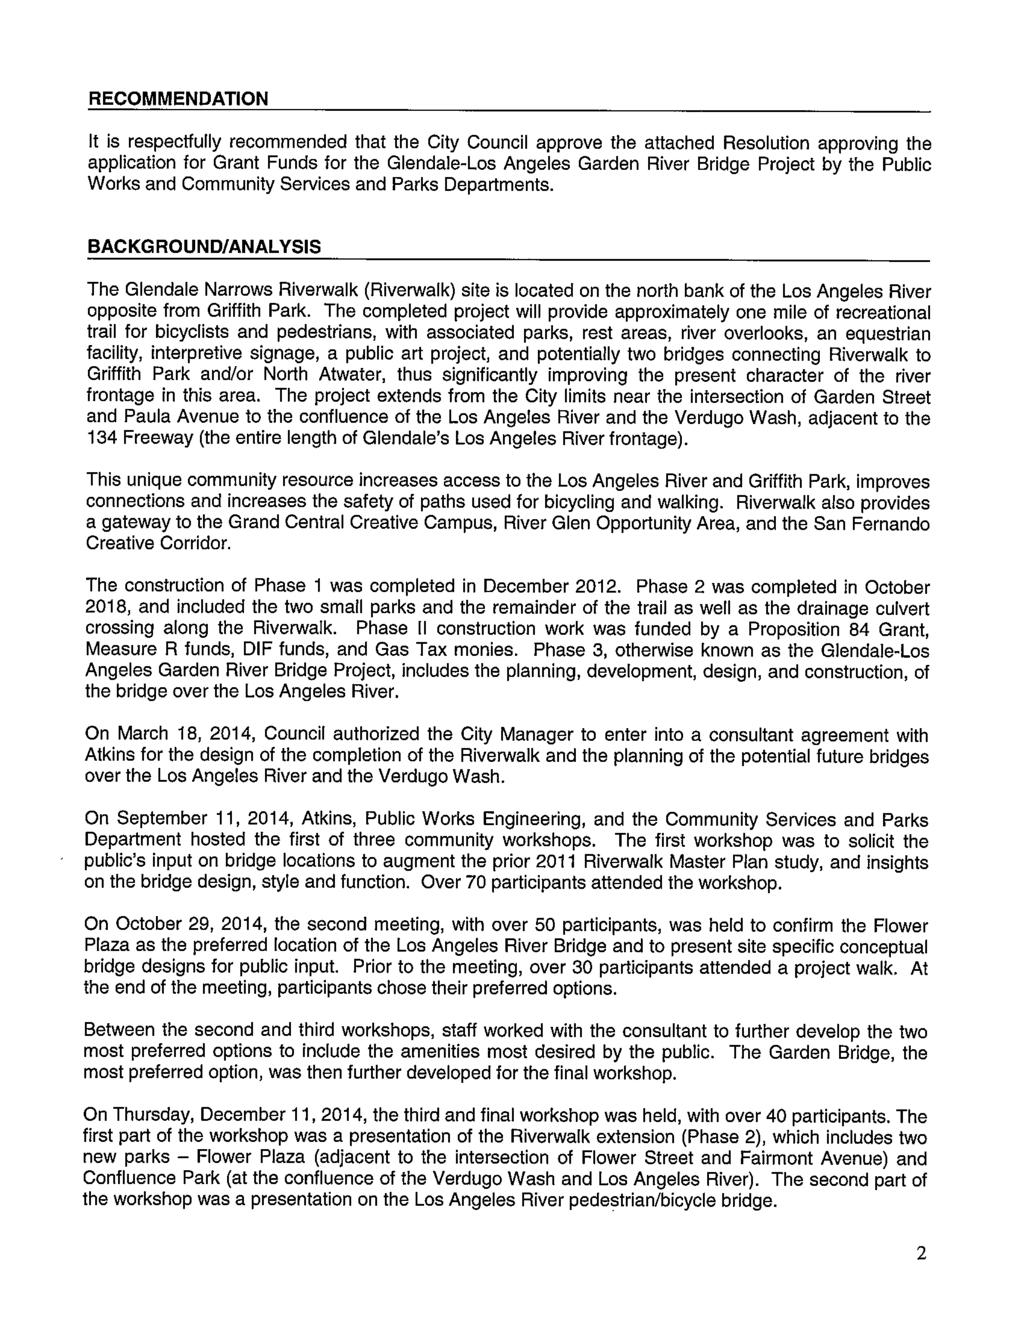 RECOMMENDATION It is respectfully recommended that the City Council approve the attached Resolution approving the application for Grant Funds for the Glendale-Los Angeles Garden River Bridge Project